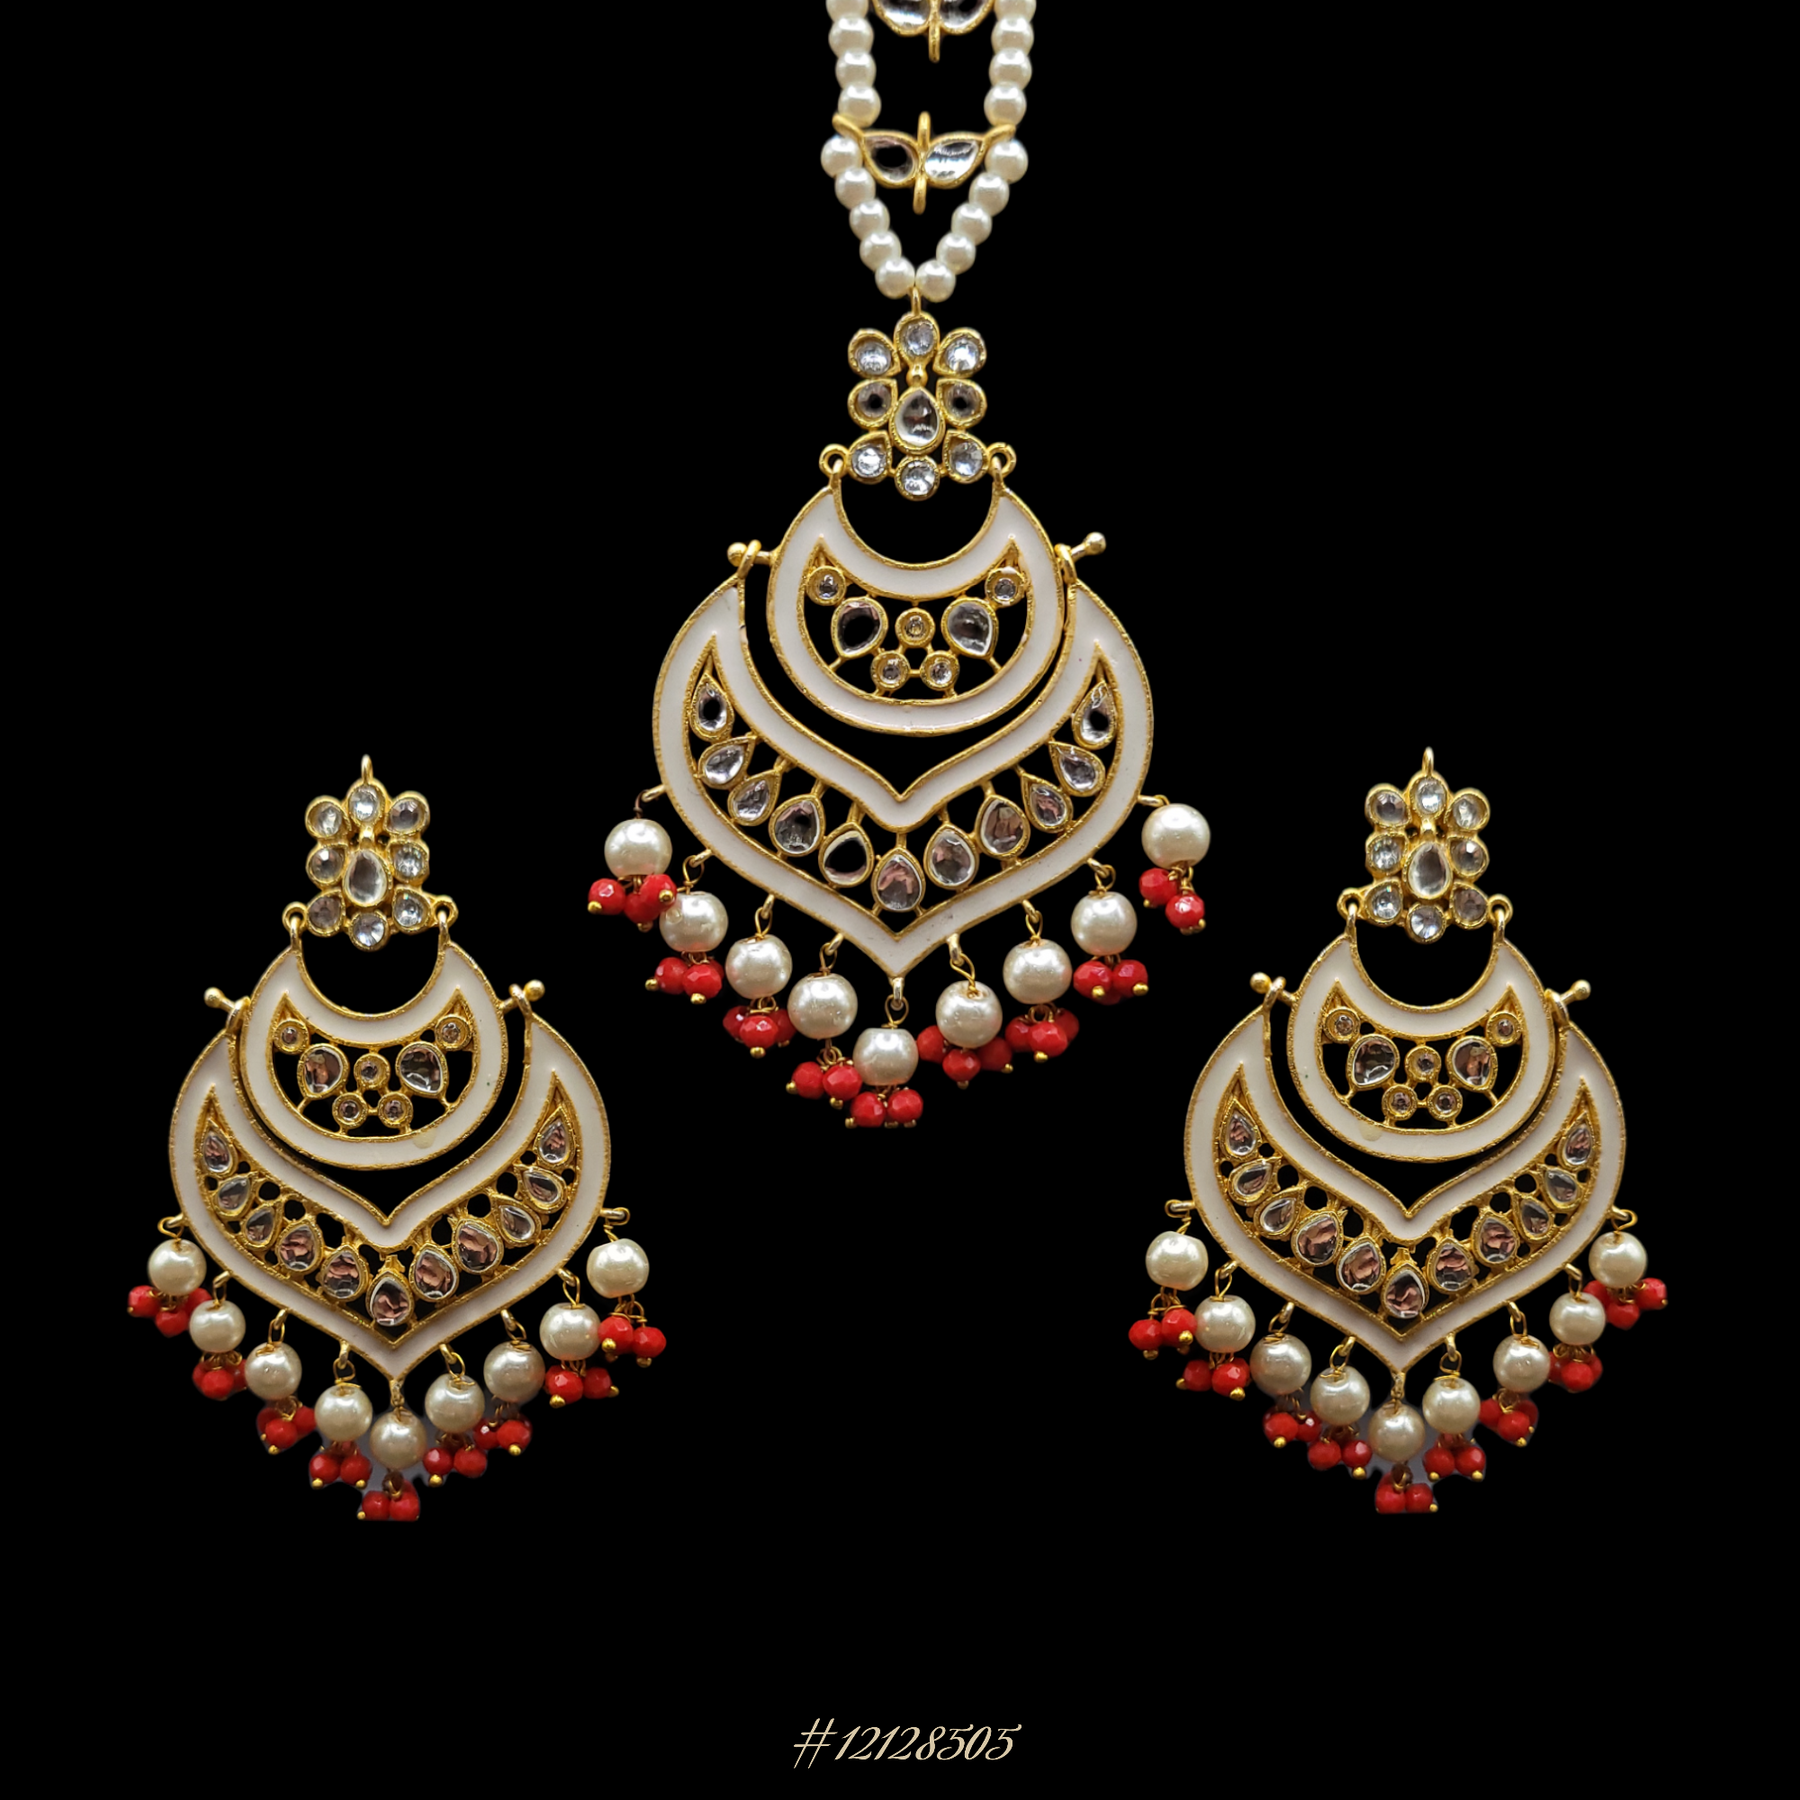 ELEGANT EARRINGS WITH MAANG TIKKA (HEAD PIECE) IN GOLD/WHITE & RED TONE